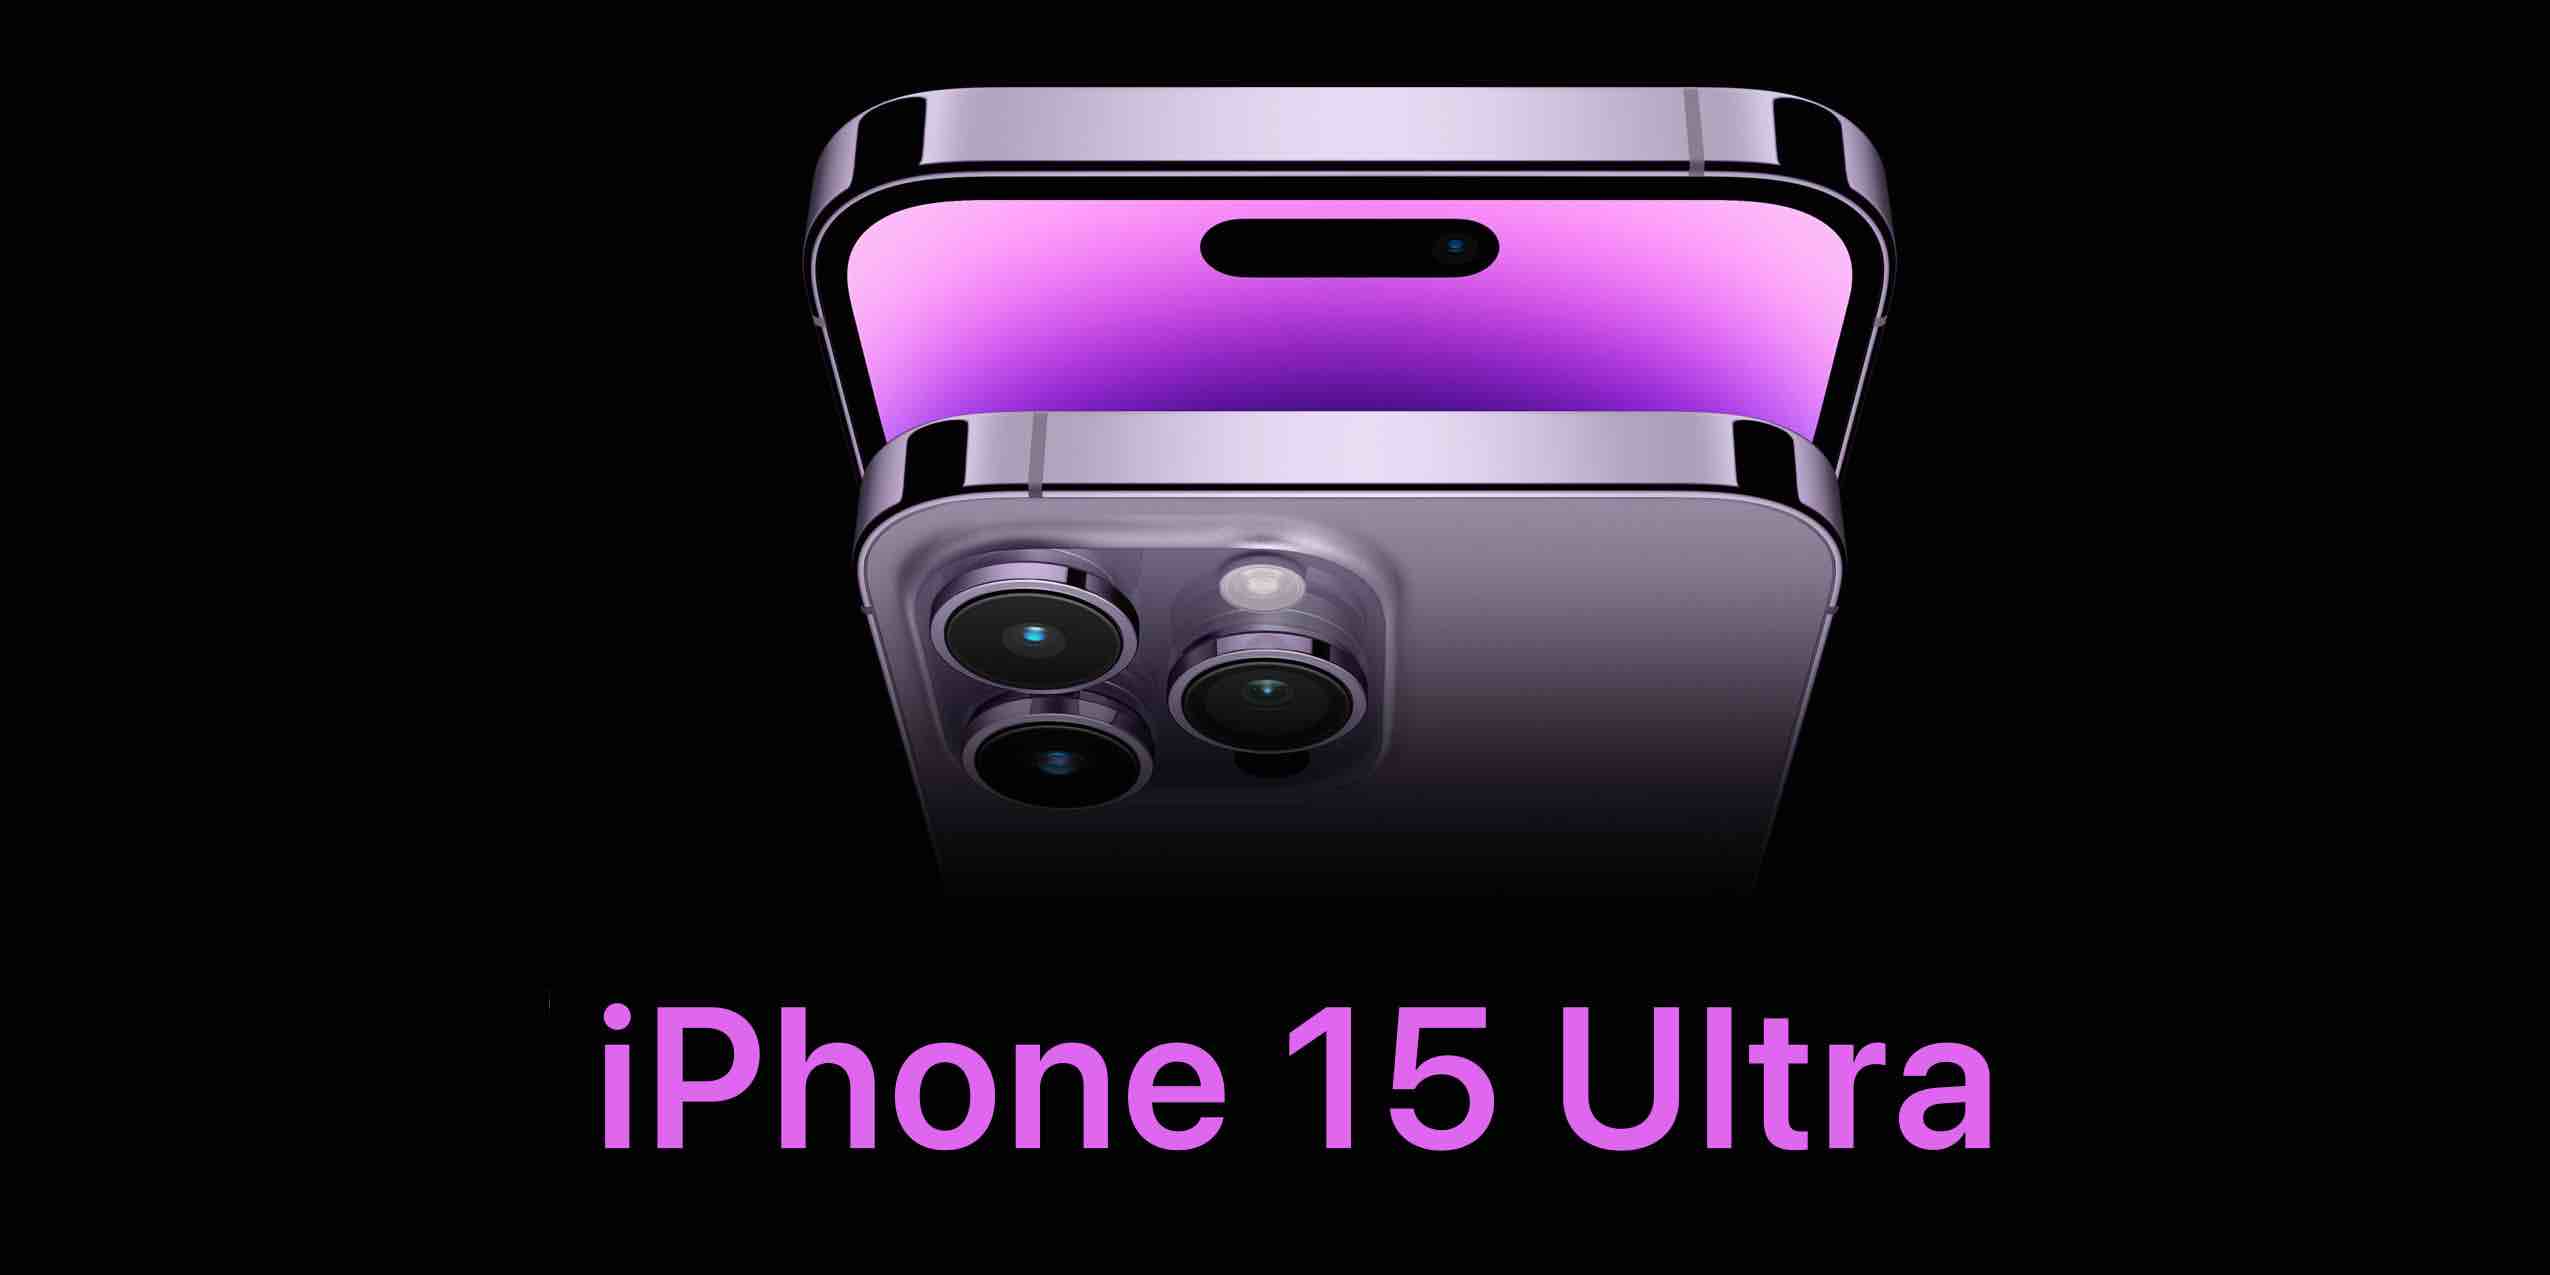 iPhone 14 Pro Price: iPhone 14 Pro models may get costlier, new